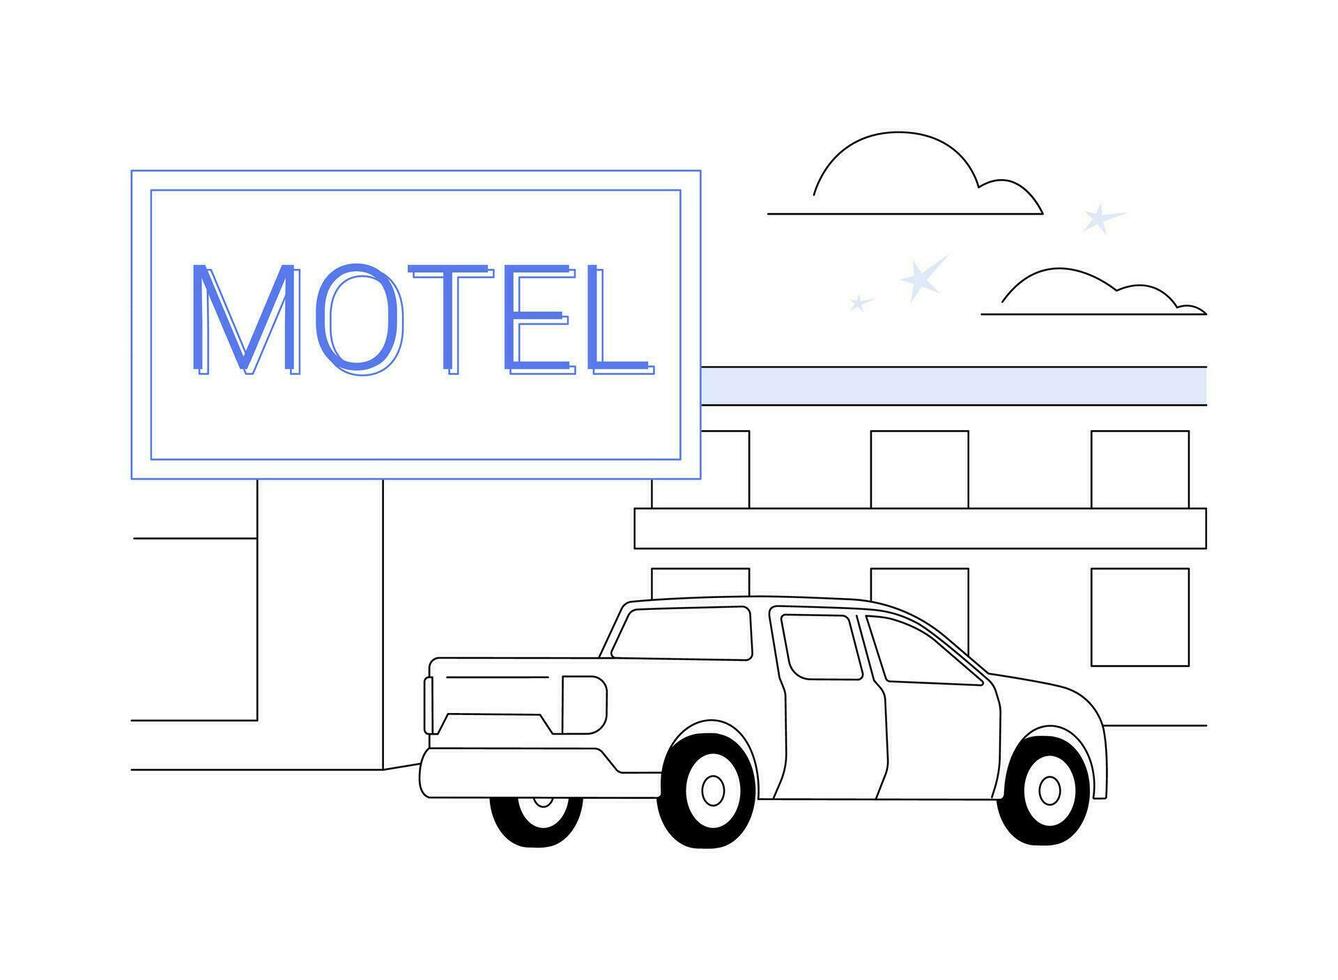 Motel abstract concept vector illustration.